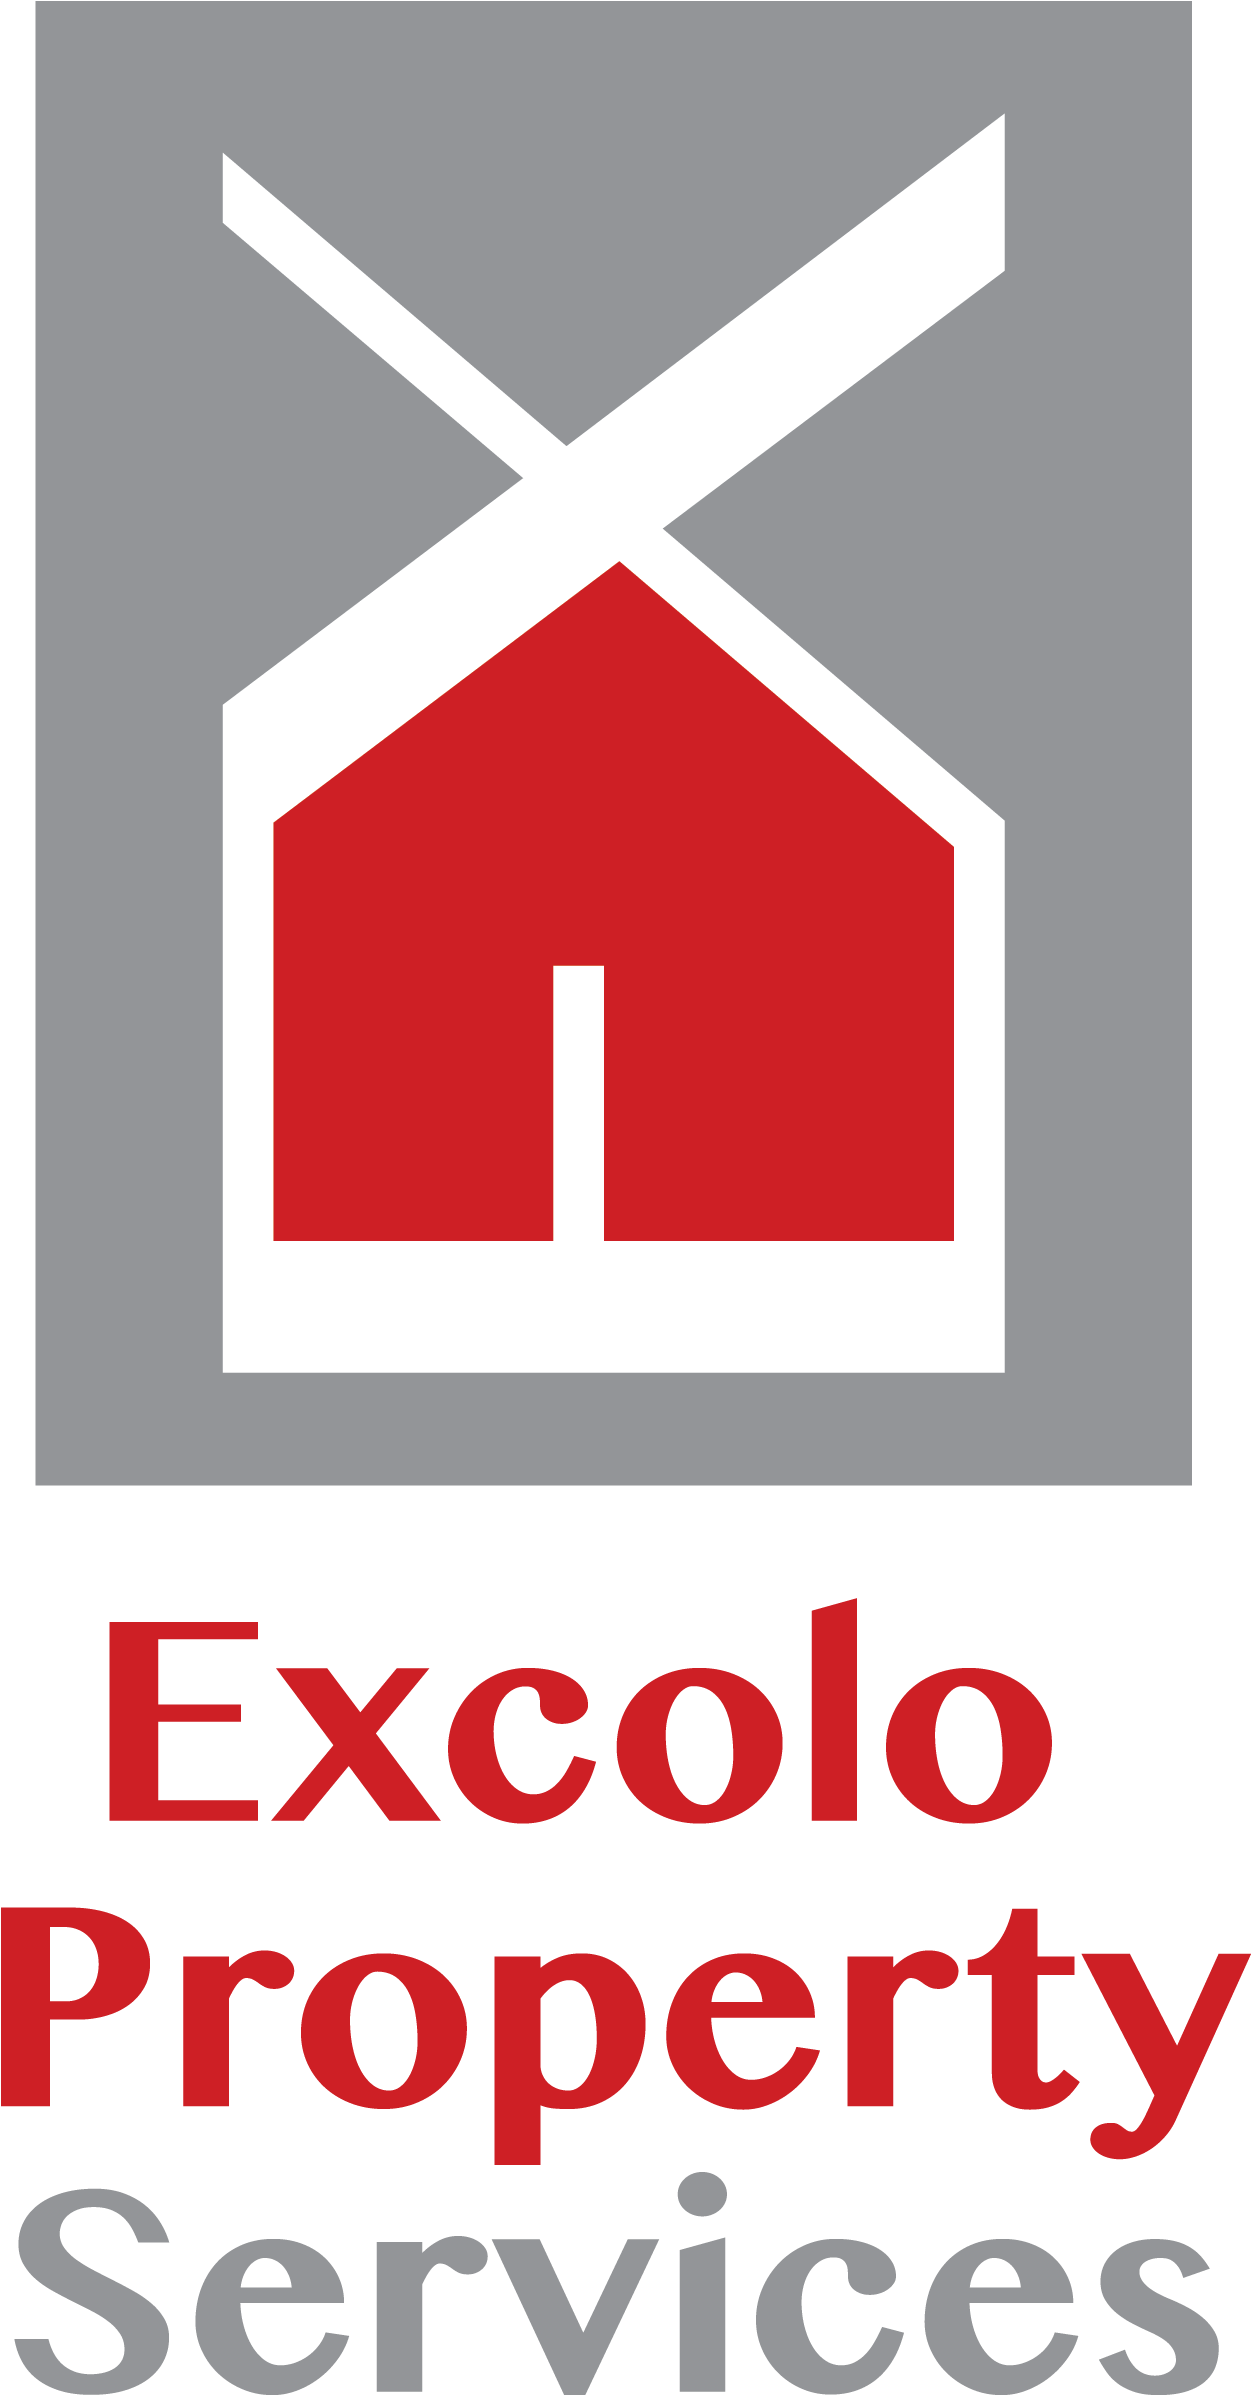 Excolo Property Services Needed A Logo And Business - Oklahoma Department Of Human Services (1299x2480)